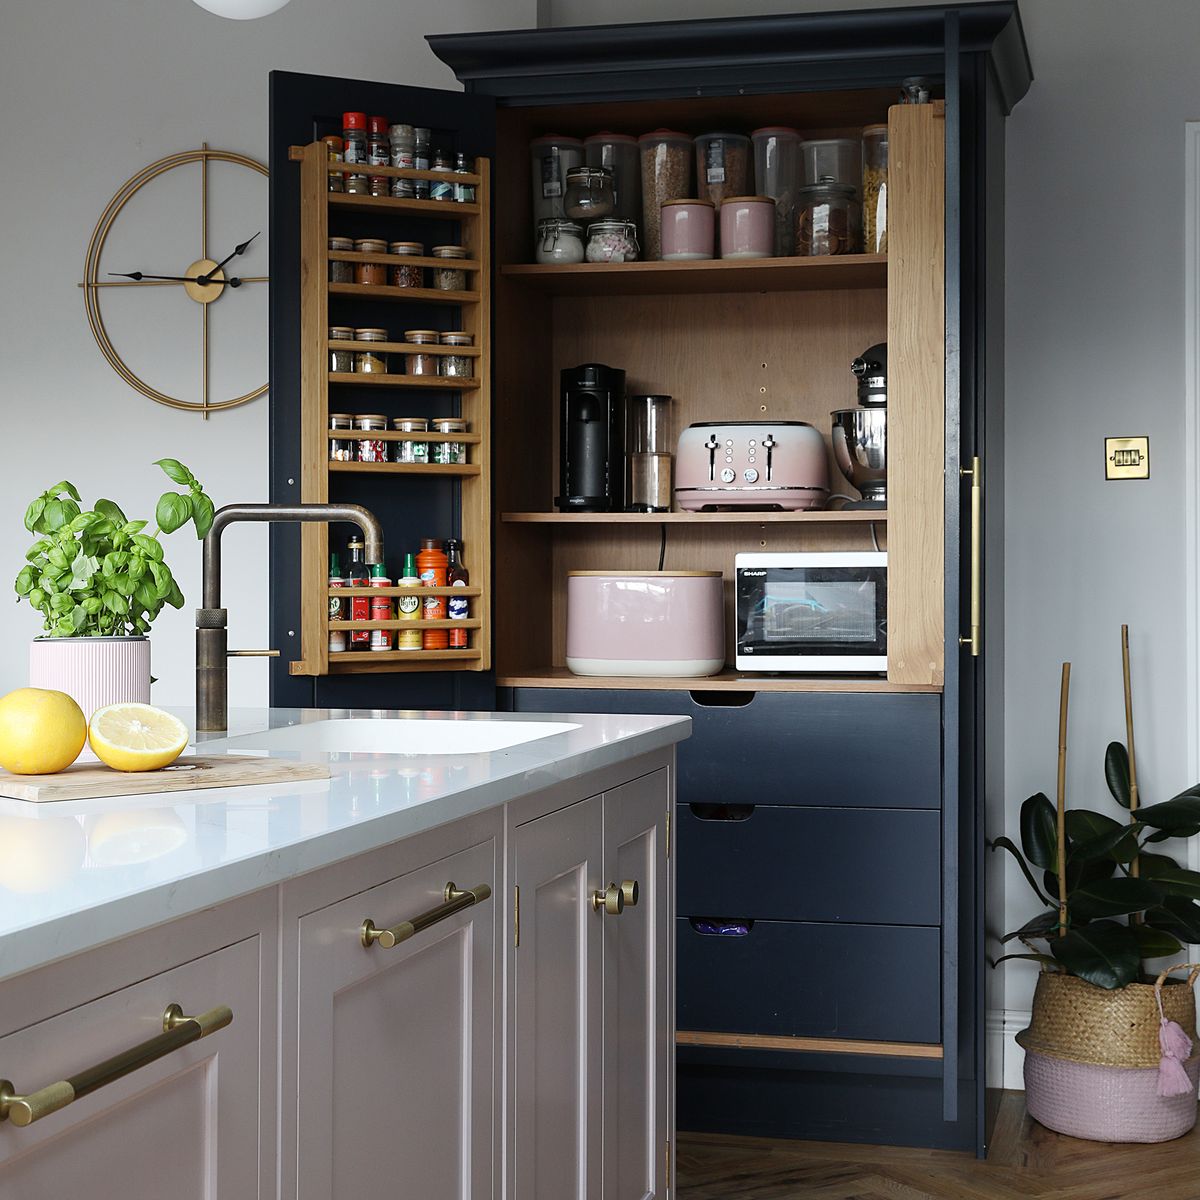 Why an appliance garage is the latest trend that no stylish kitchen ...